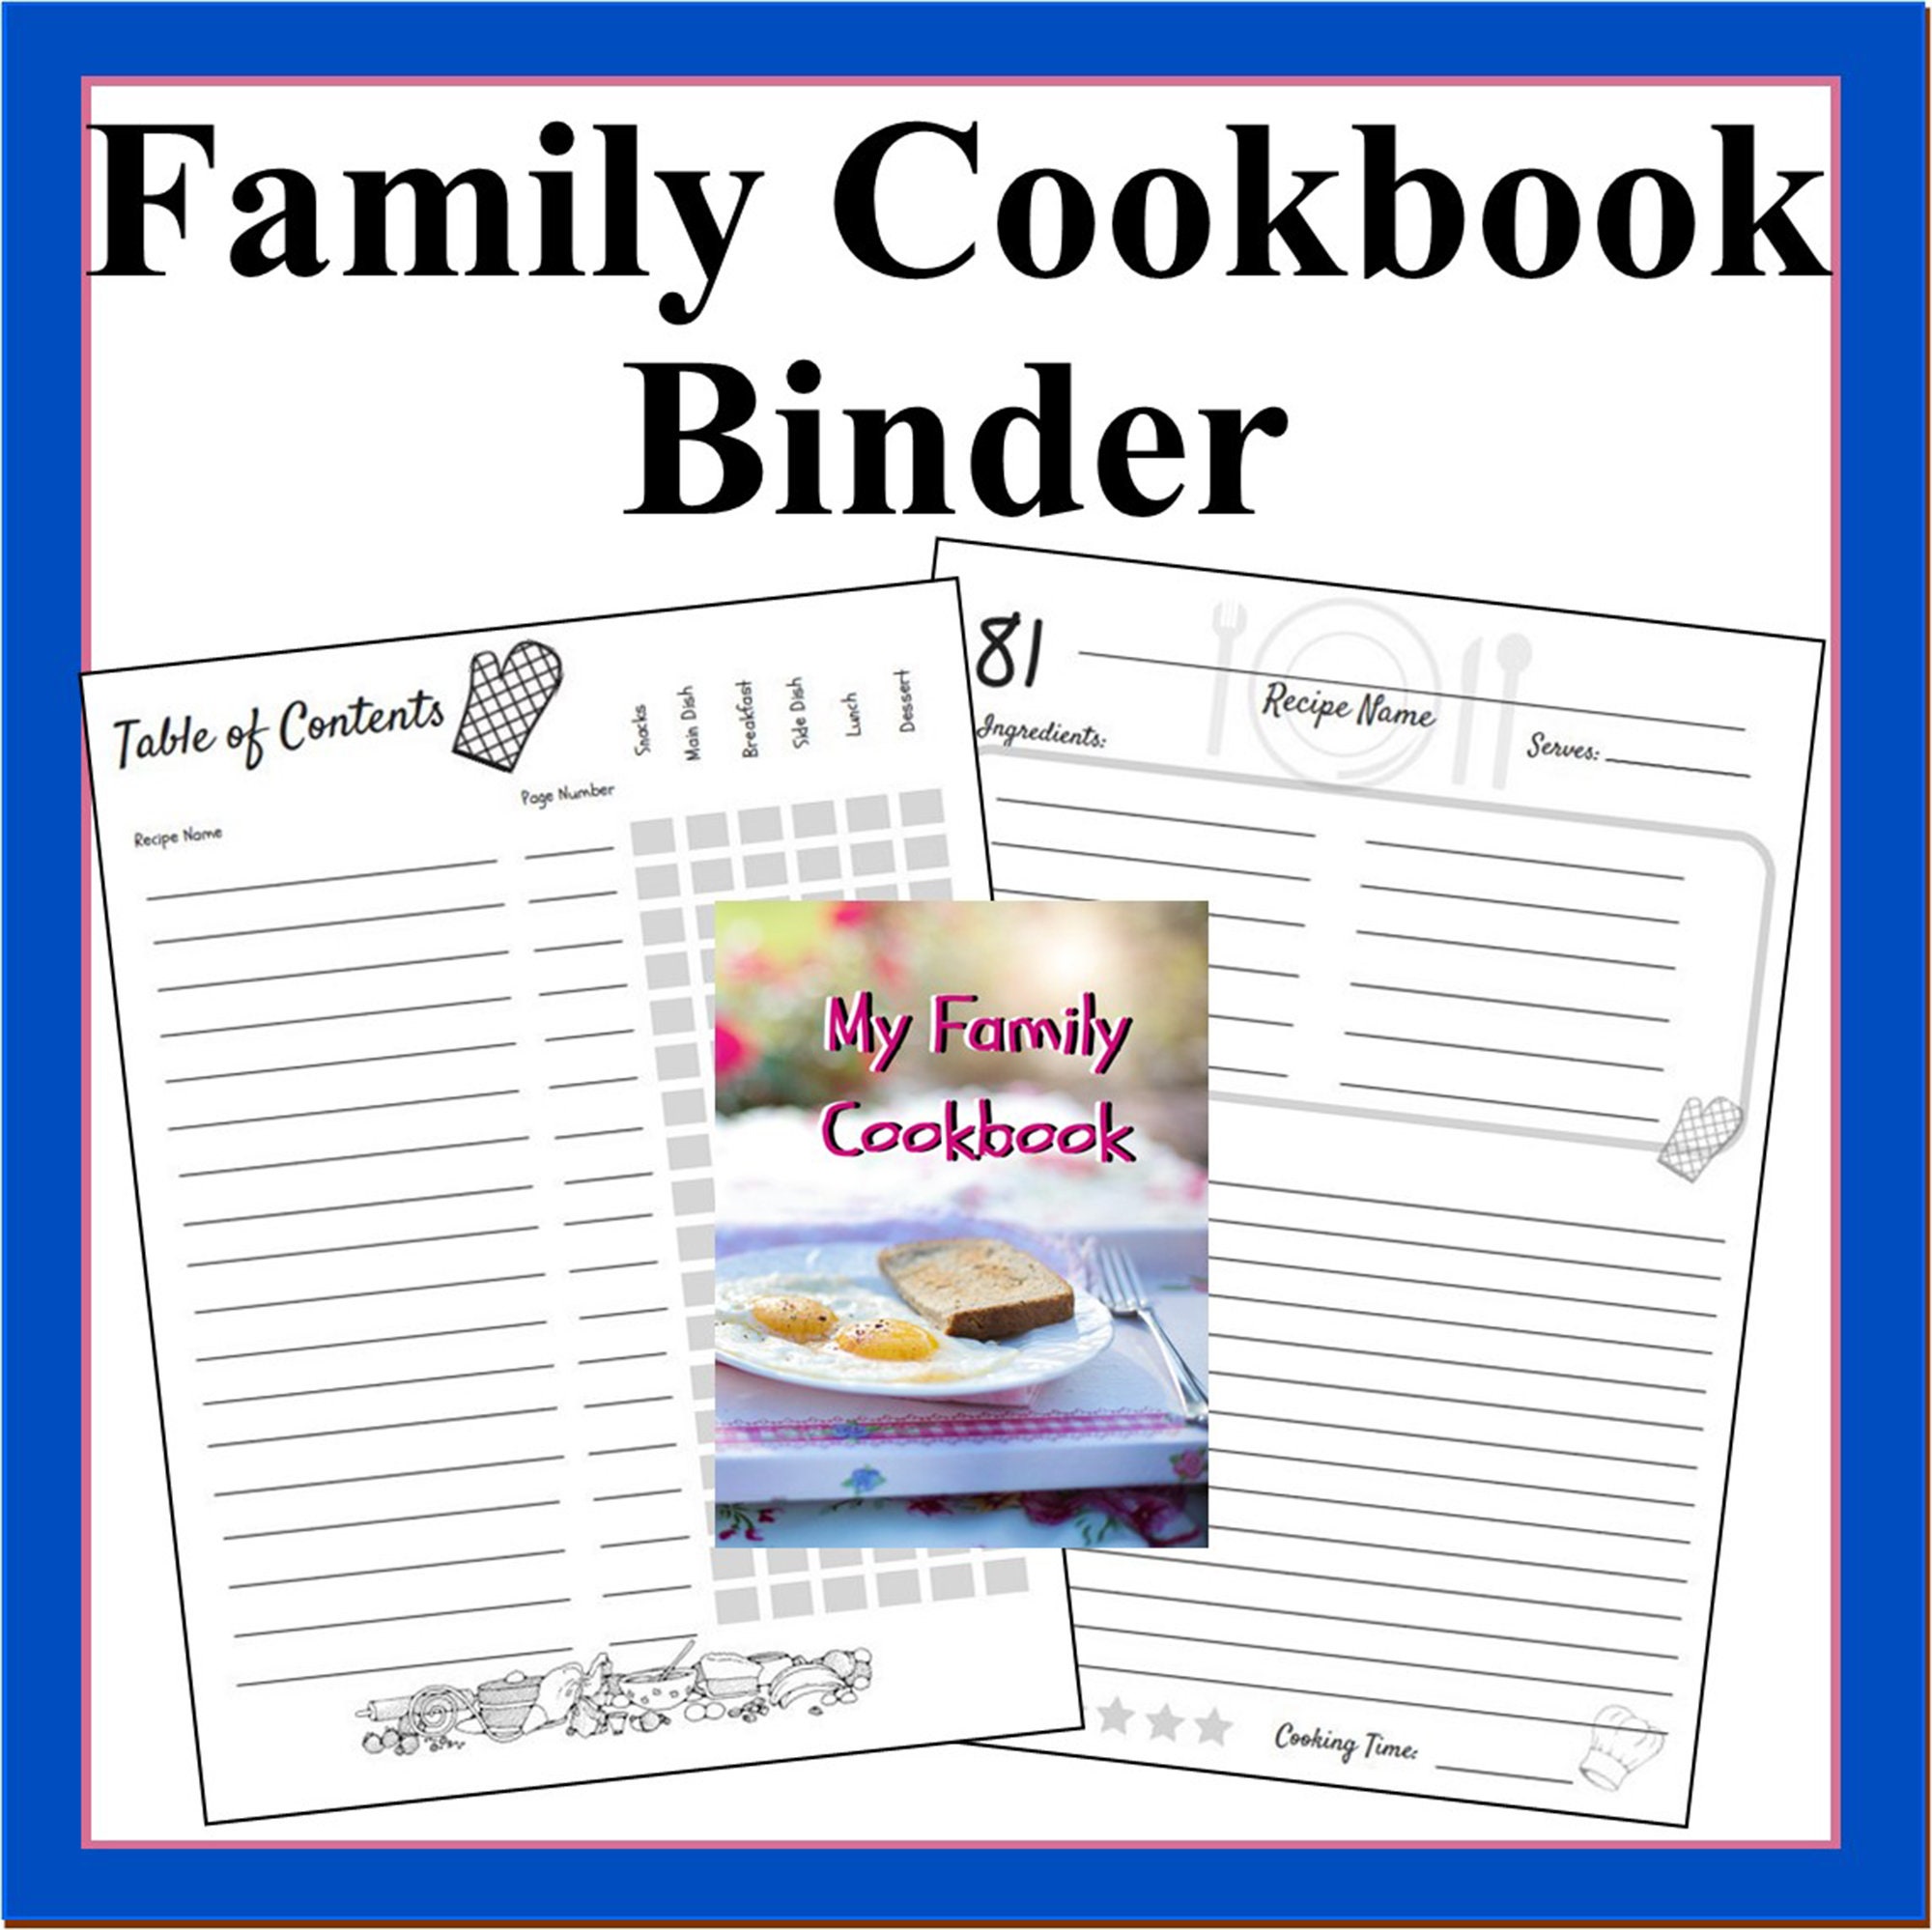 My Book of Recipes: Write your Own Recipes in your Own Recipe Book - A  Blank Recipe Journal, Can be Used as a Family Cookbook, & DIY Food Recipe  Organizer. by Simple